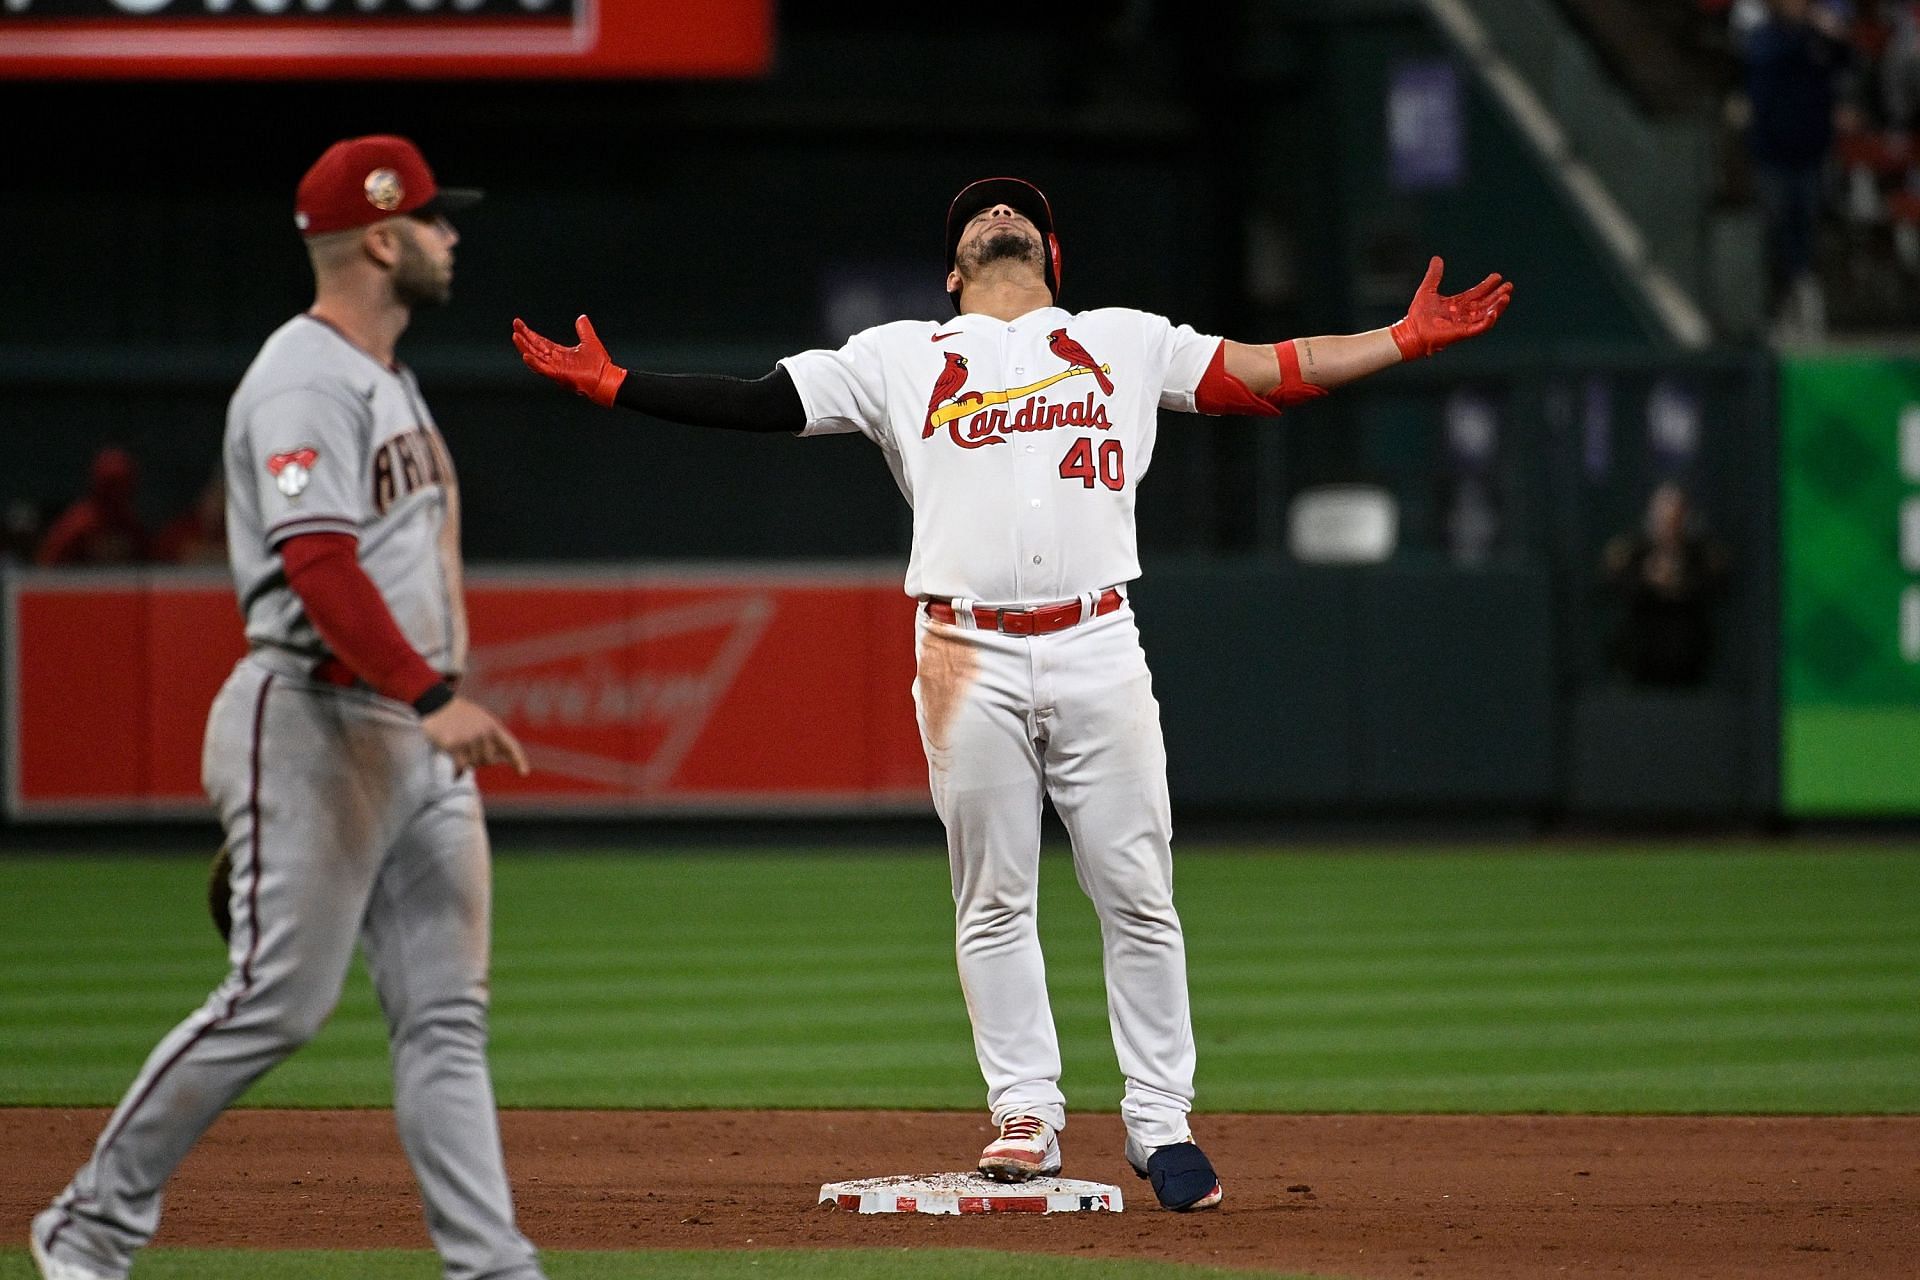 Cardinals' Contreras on Madison Bumgarner: 'He blew out in that